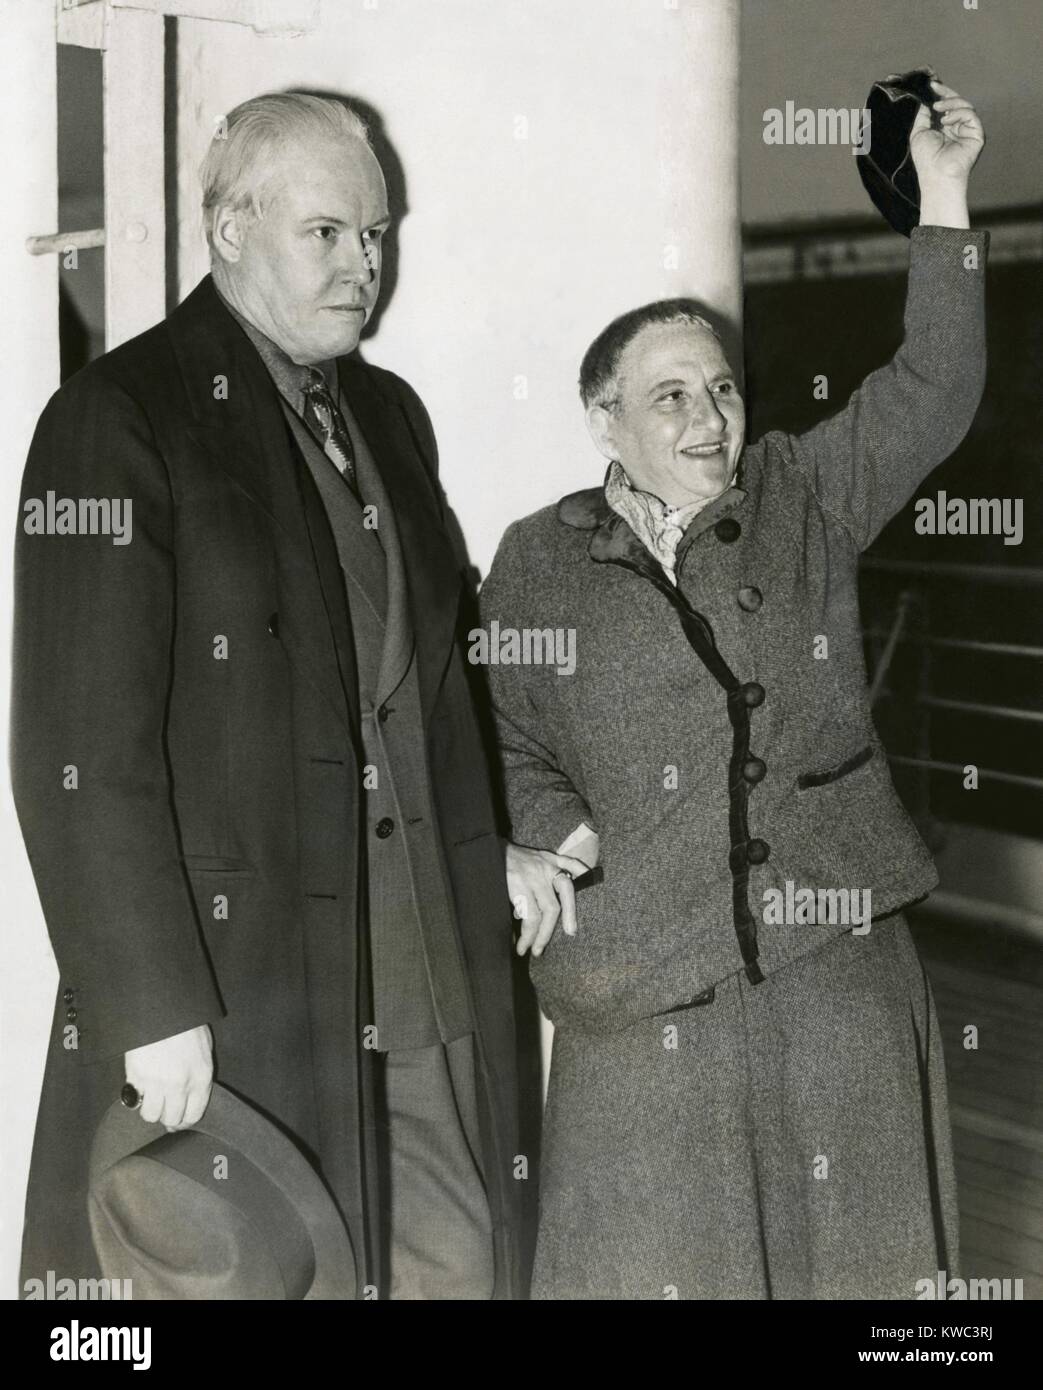 Photographer Carl Van Vechten with Gertrude Stein as she waves her hat from S.S. Champlain. May 4, 1935. Stein had been part of the expatriate art community is Paris for decades. In 1933 she published a best selling memoir, 'The Autobiography of Alice B. Toklas,' written in the voice of Toklas, her life partner. (BSLOC 2015 14 179) Stock Photo